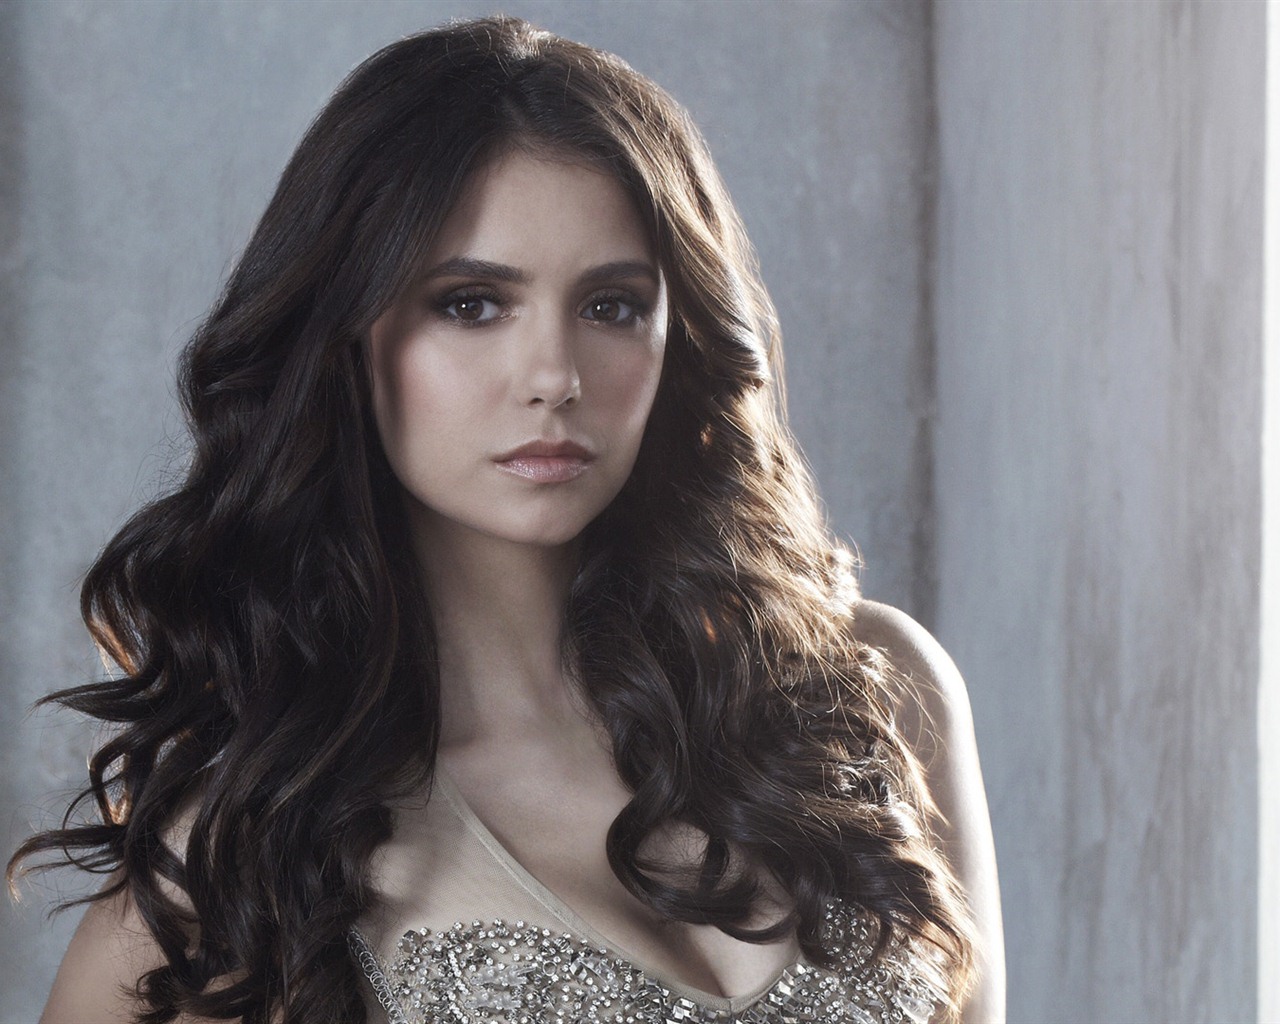 The Vampire Diaries wallpapers HD #15 - 1280x1024